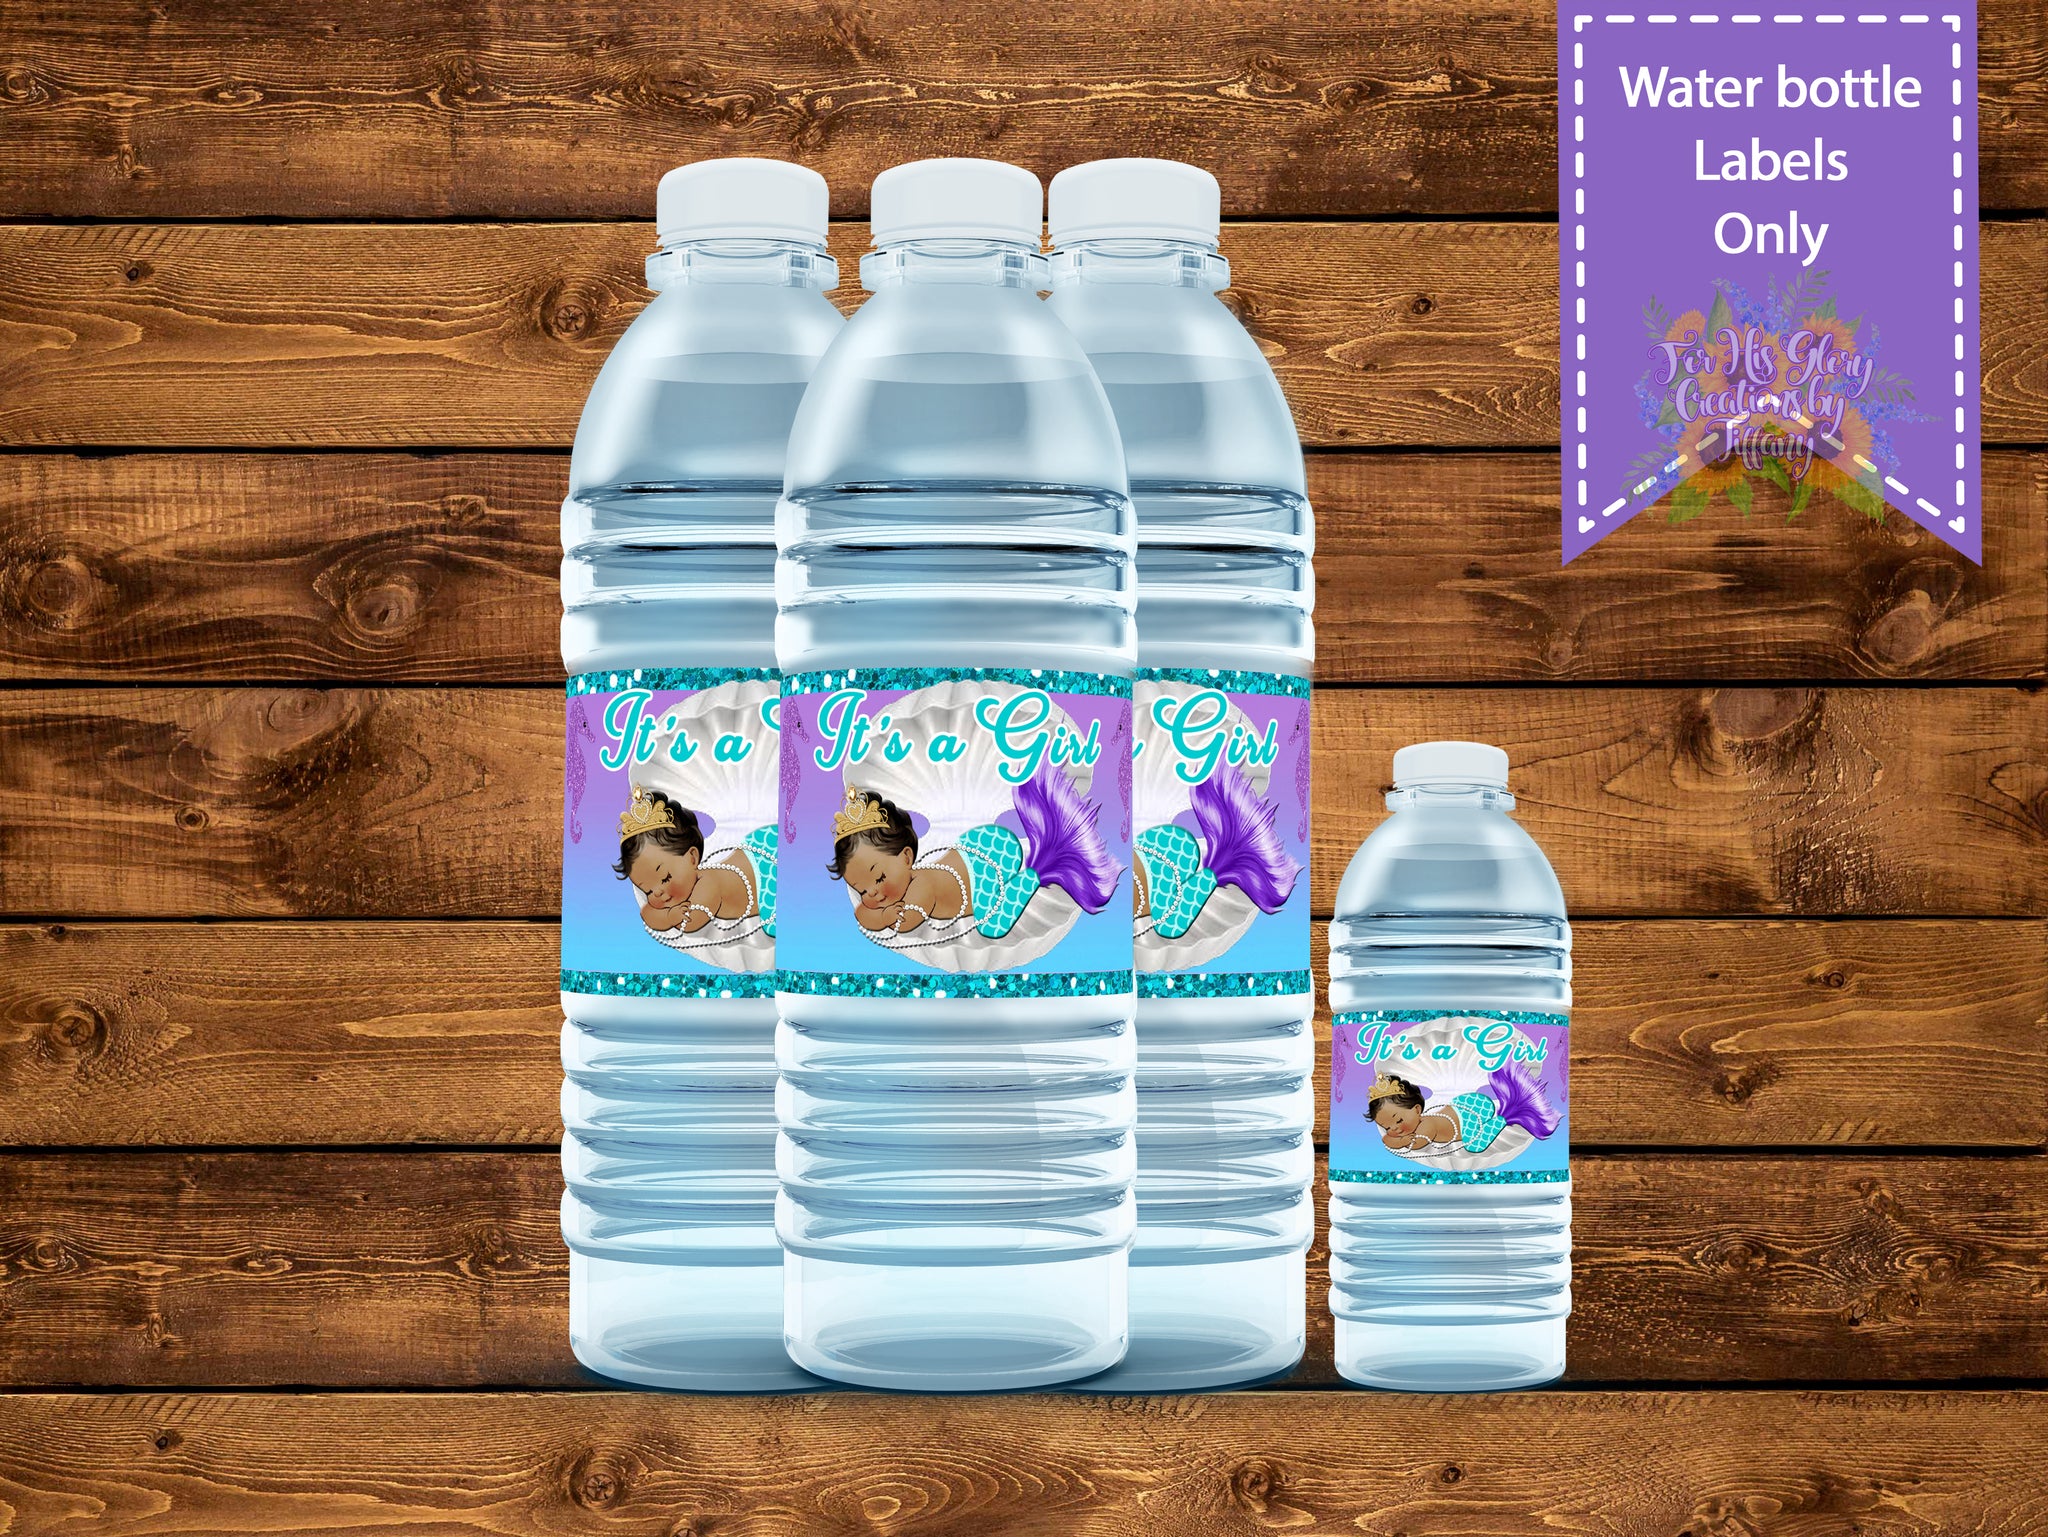 Personalized Water Bottle Labels - It's a Girl!